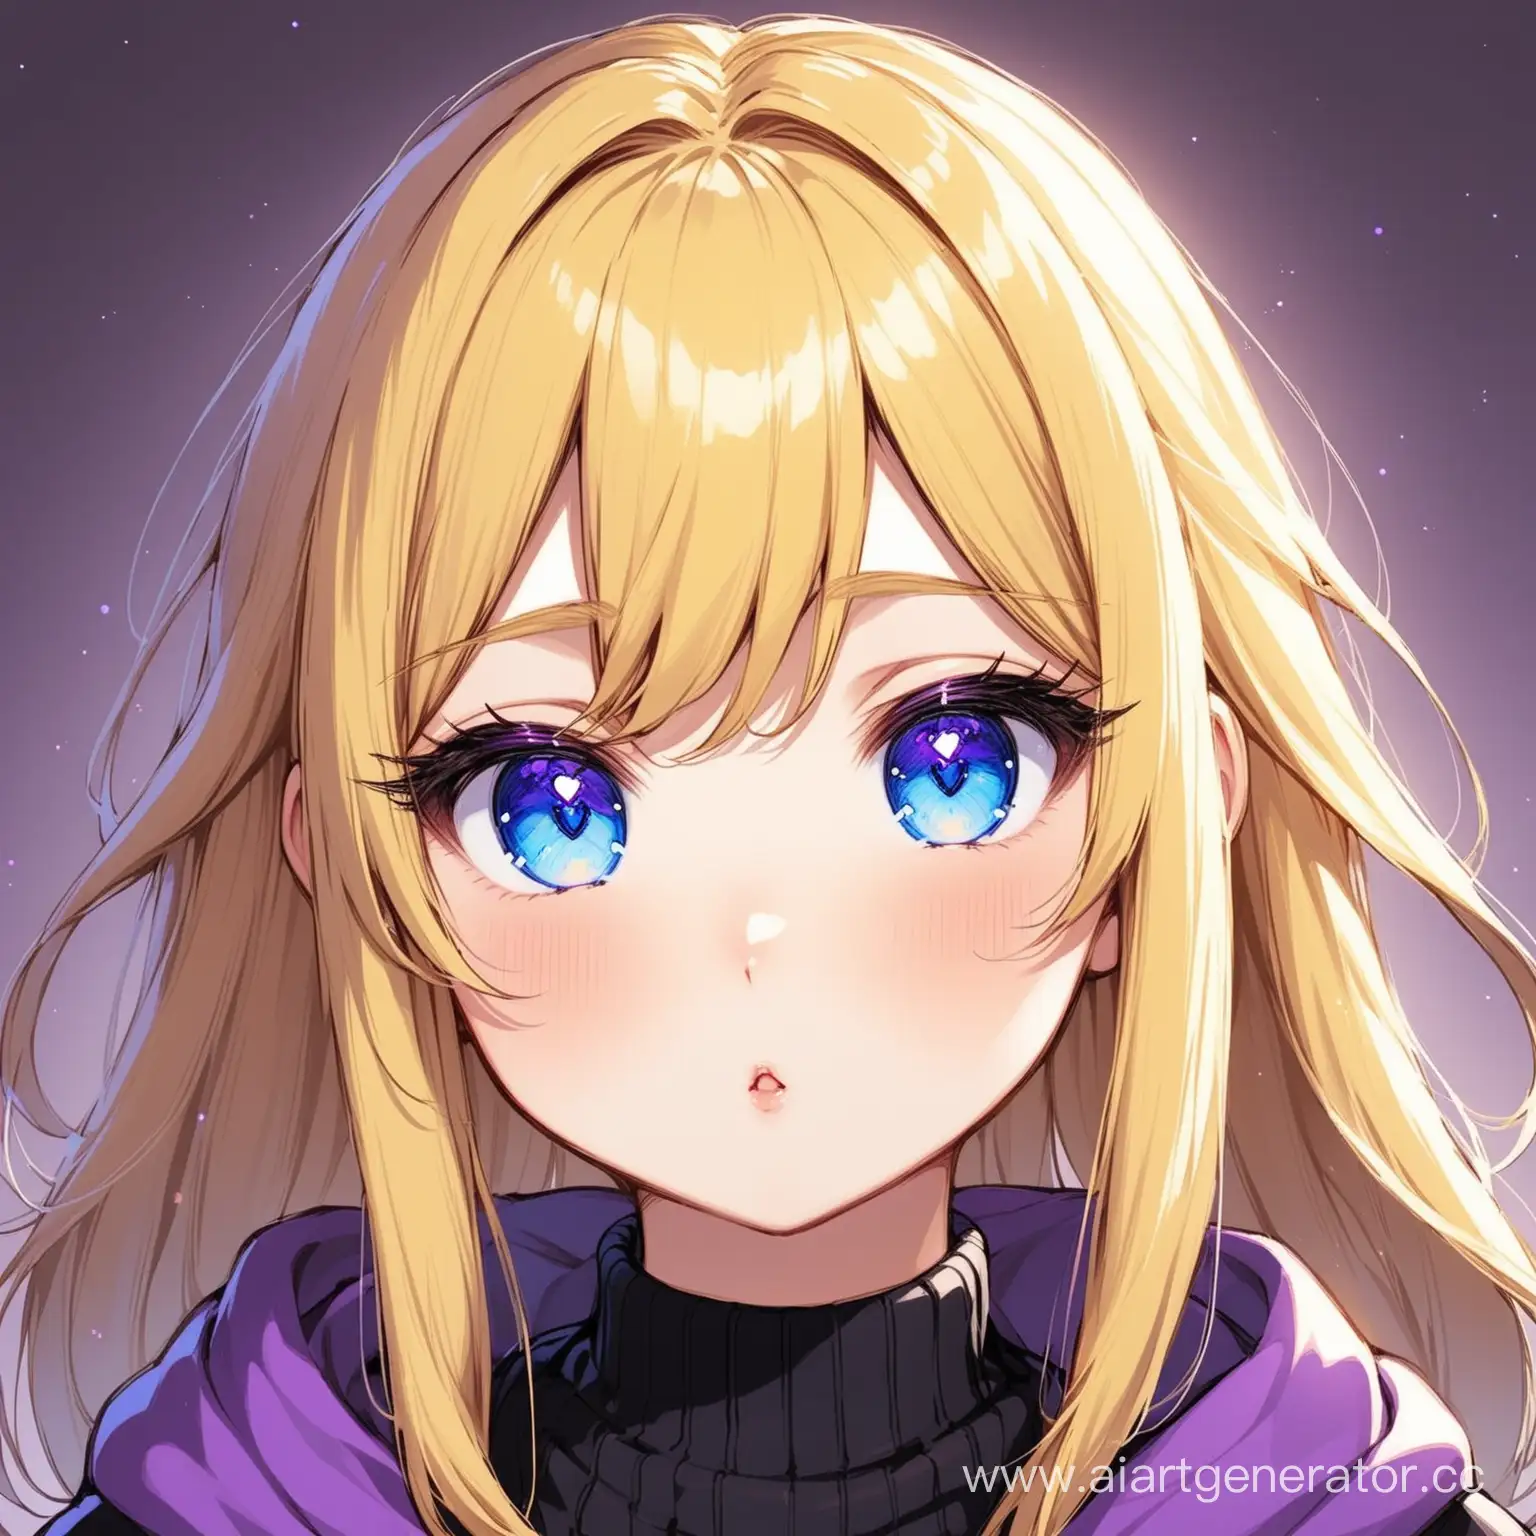 Cheerful-Blonde-Girl-in-Black-and-Purple-Attire-with-Blue-Eyes